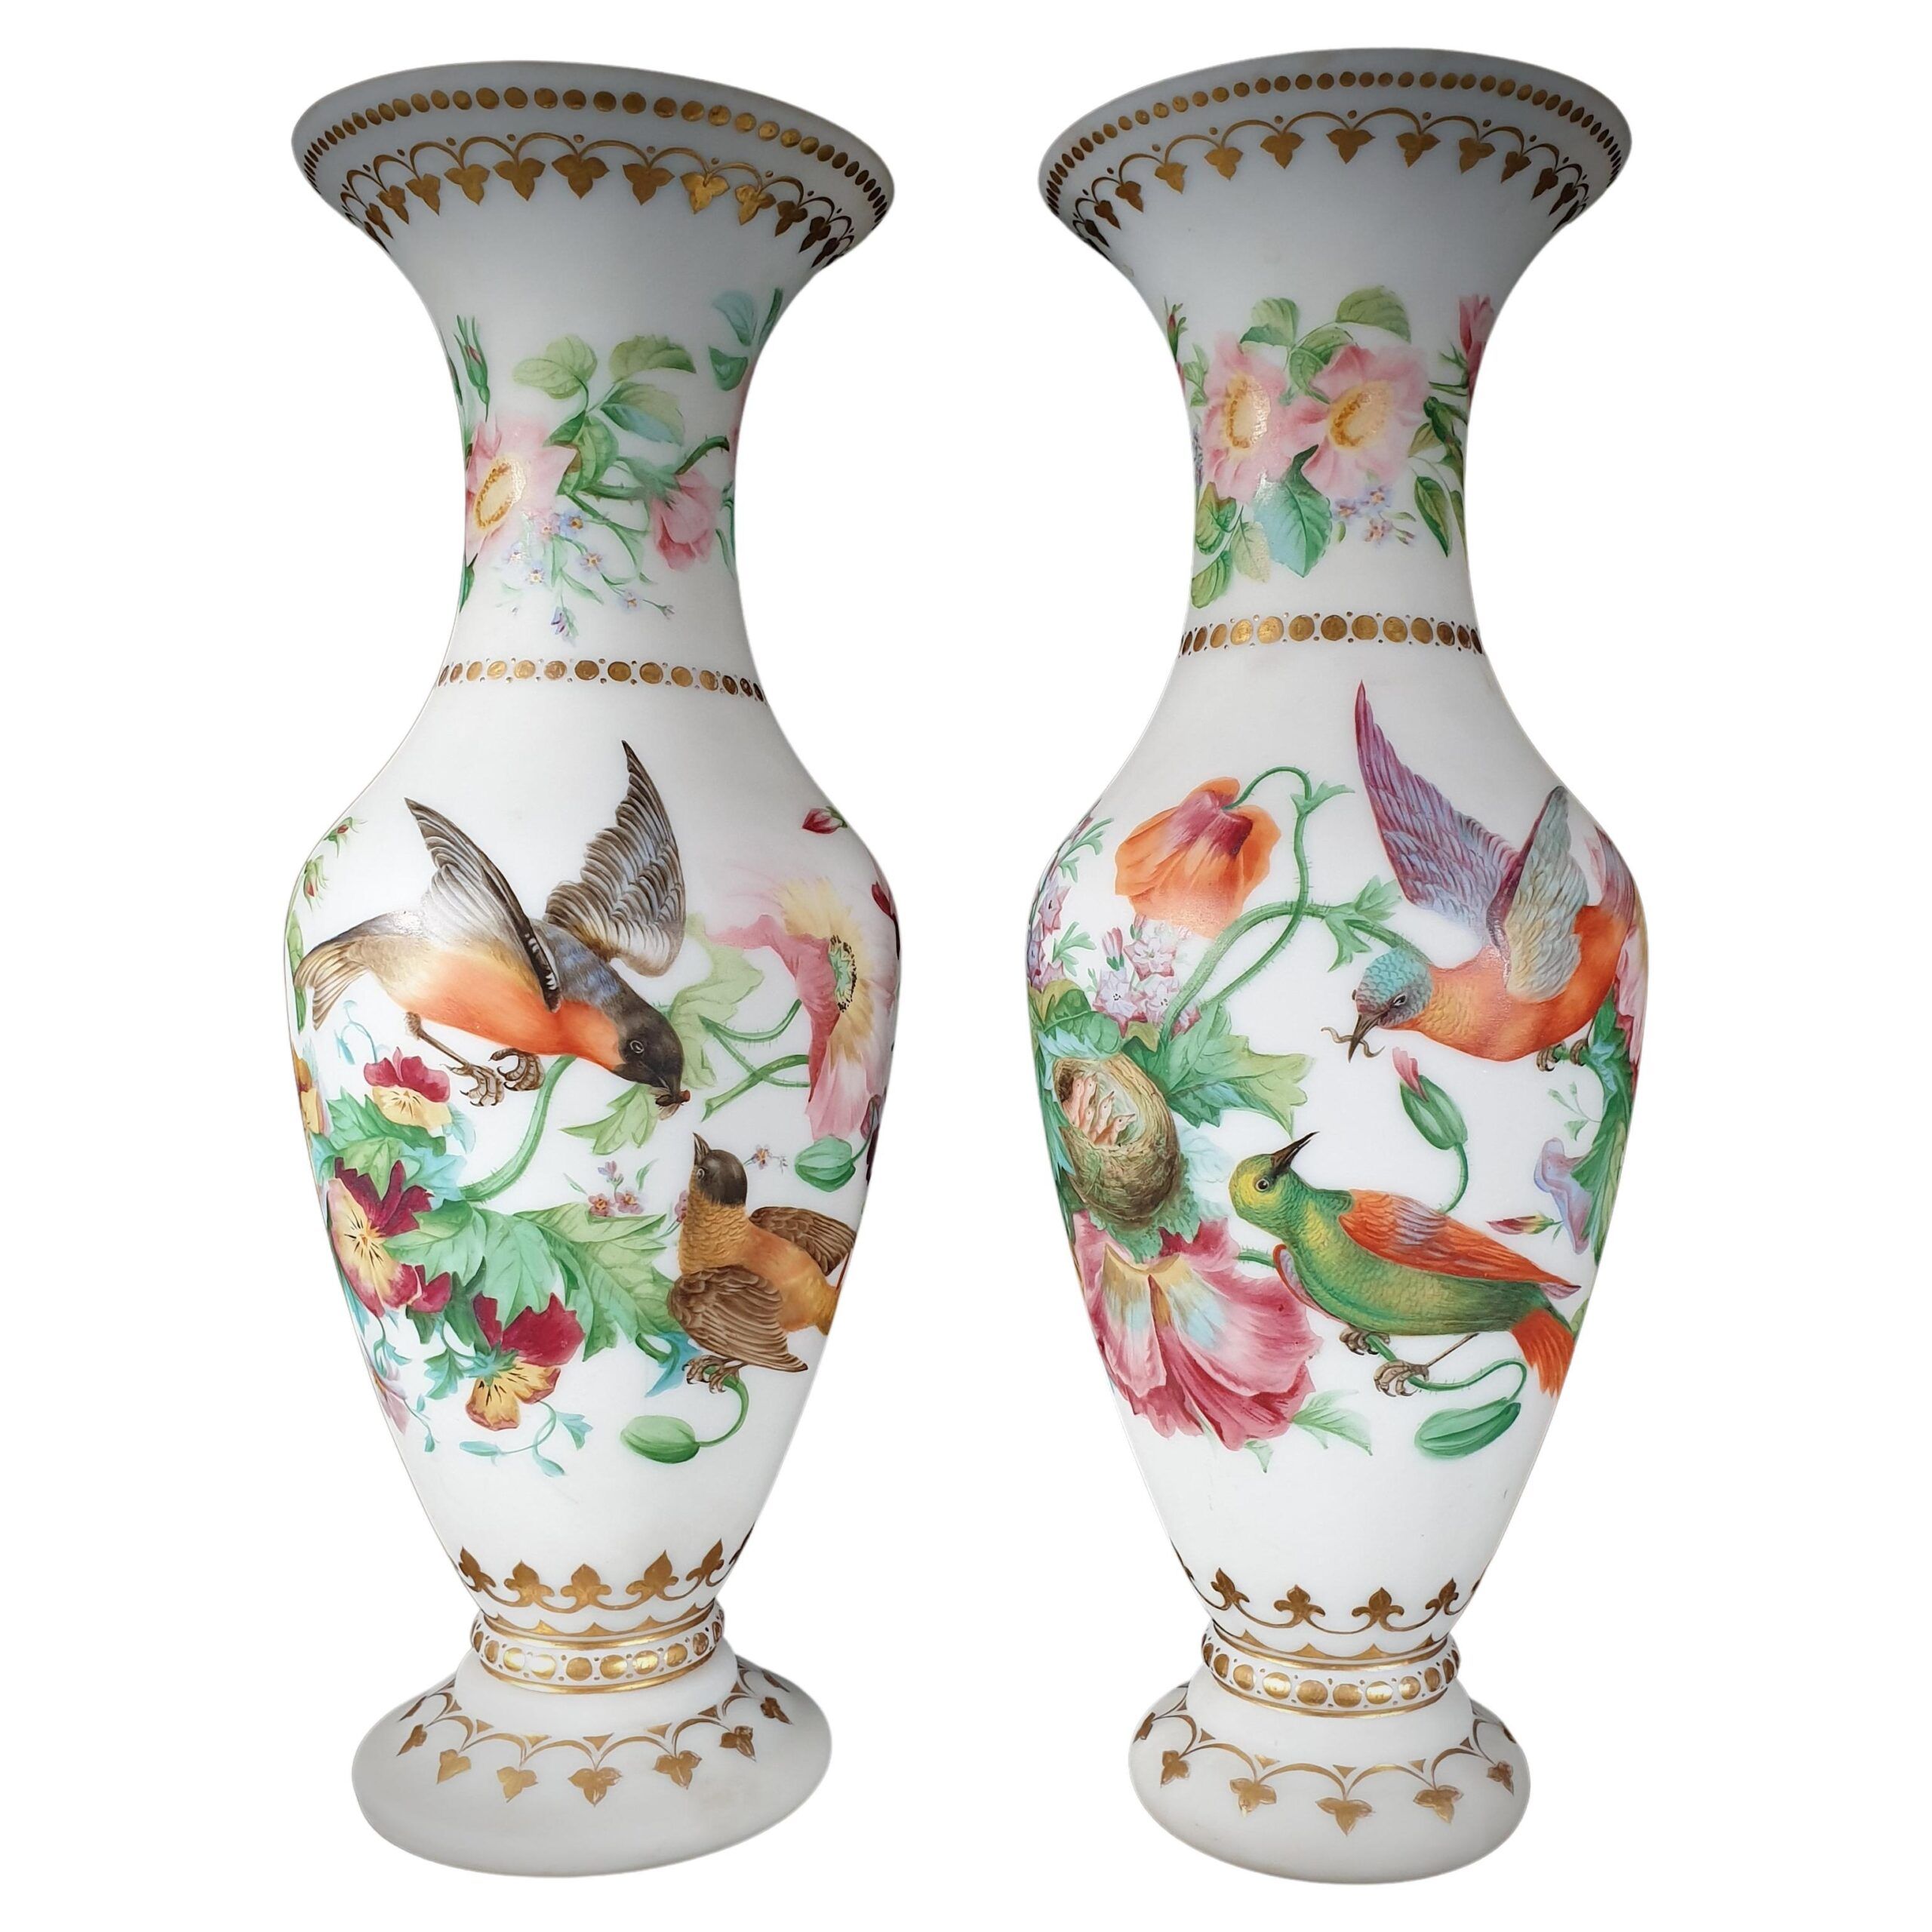 Exquisite Elegance: Exploring the Beauty of 19th Century Glass Vases